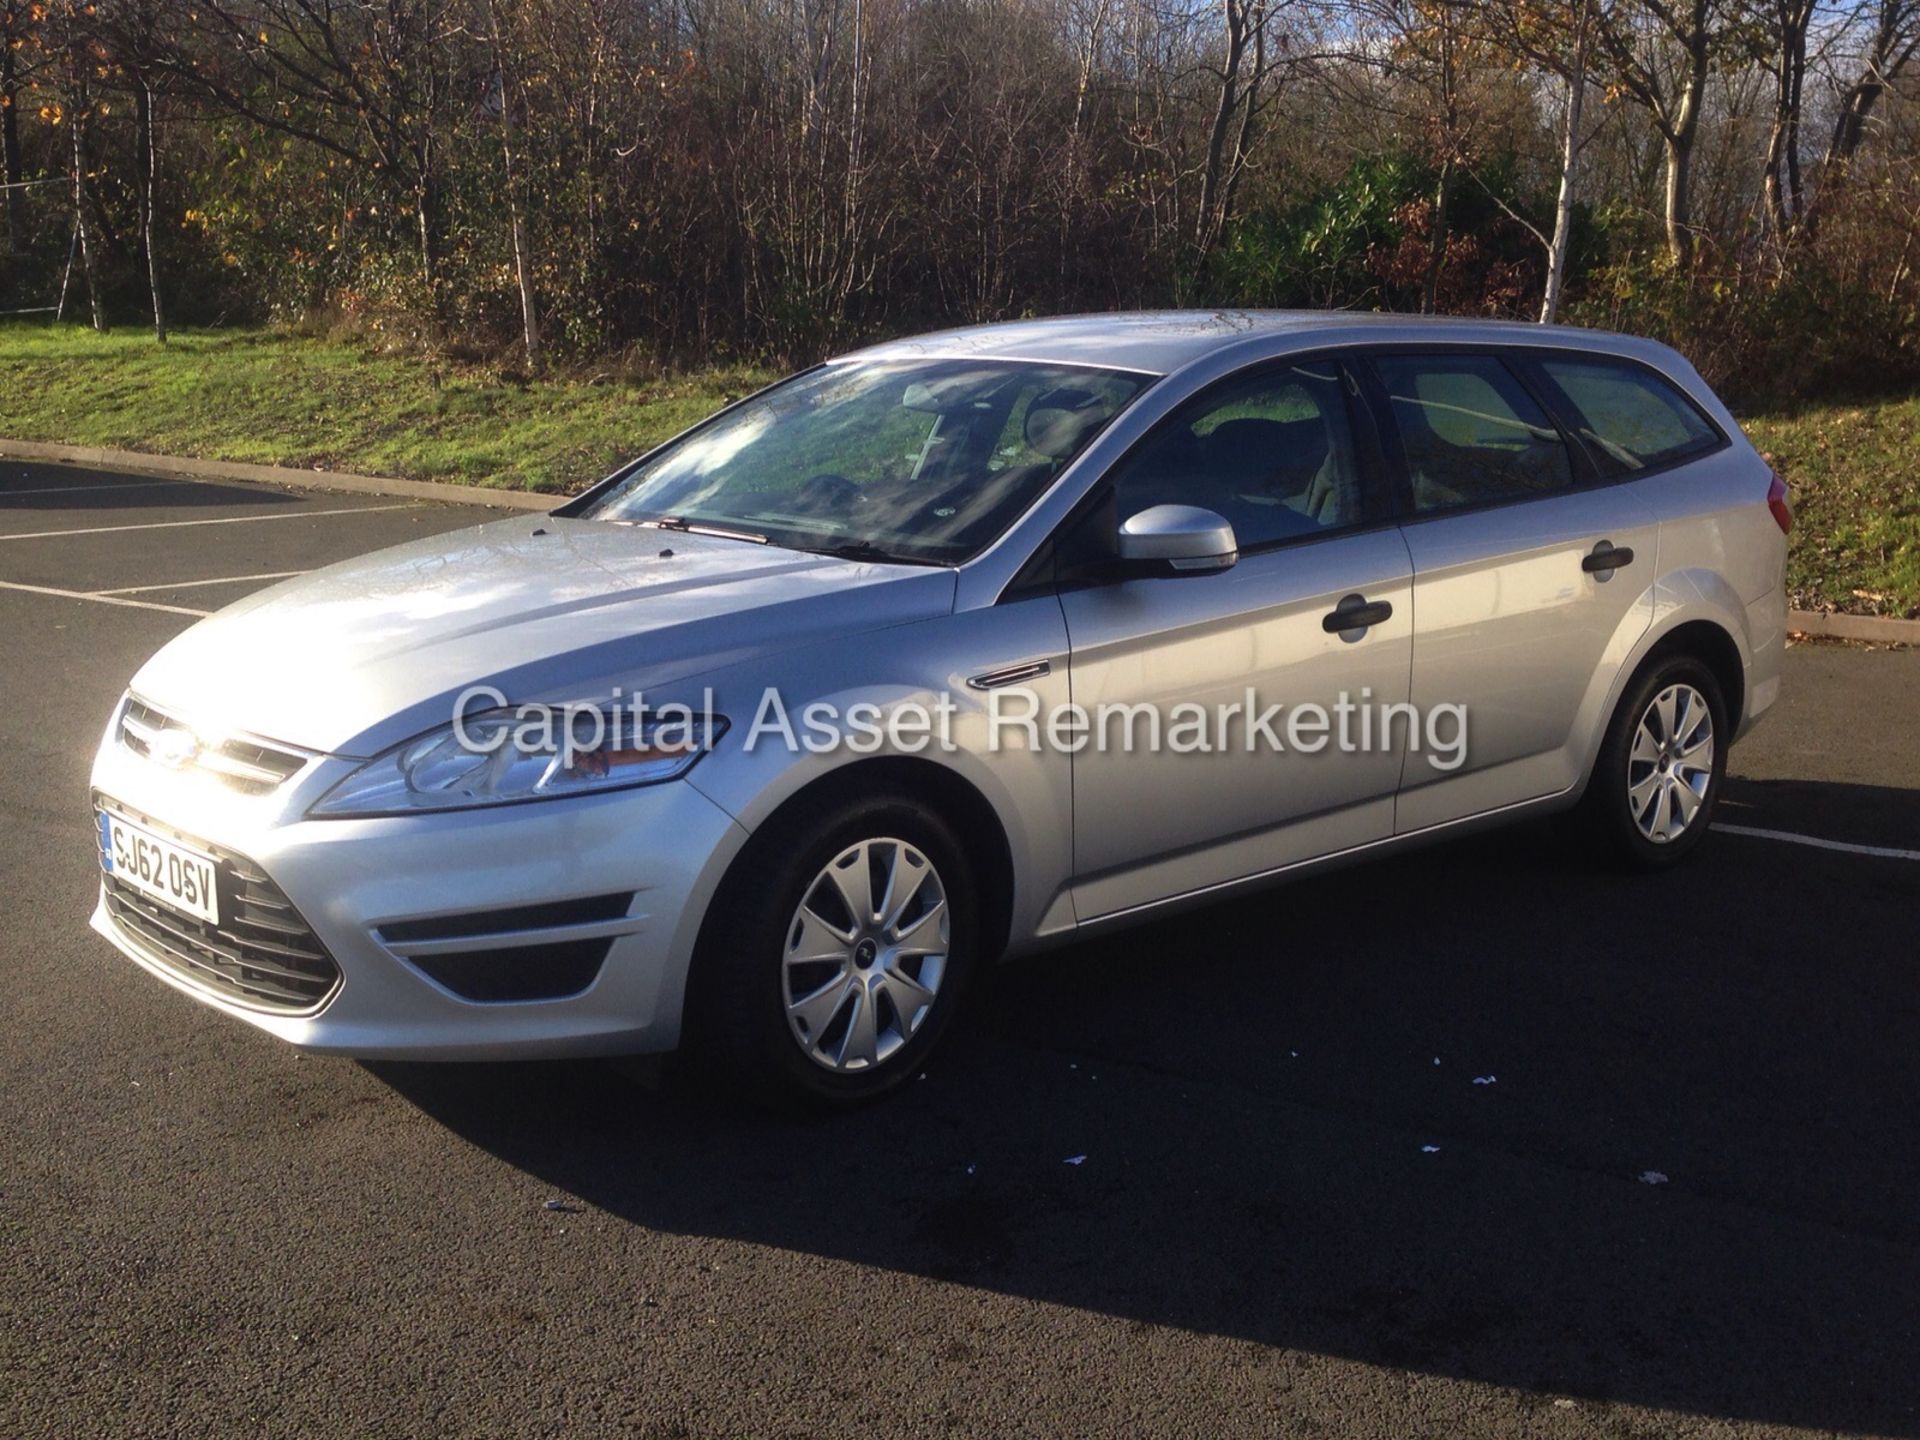 FORD MONDEO 'DIESEL' ESTATE (2013 SPEC) 2.0 TDCI - 140 PS - 6 SPEED - AIR CON (1 OWNER FROM NEW) - Image 3 of 15